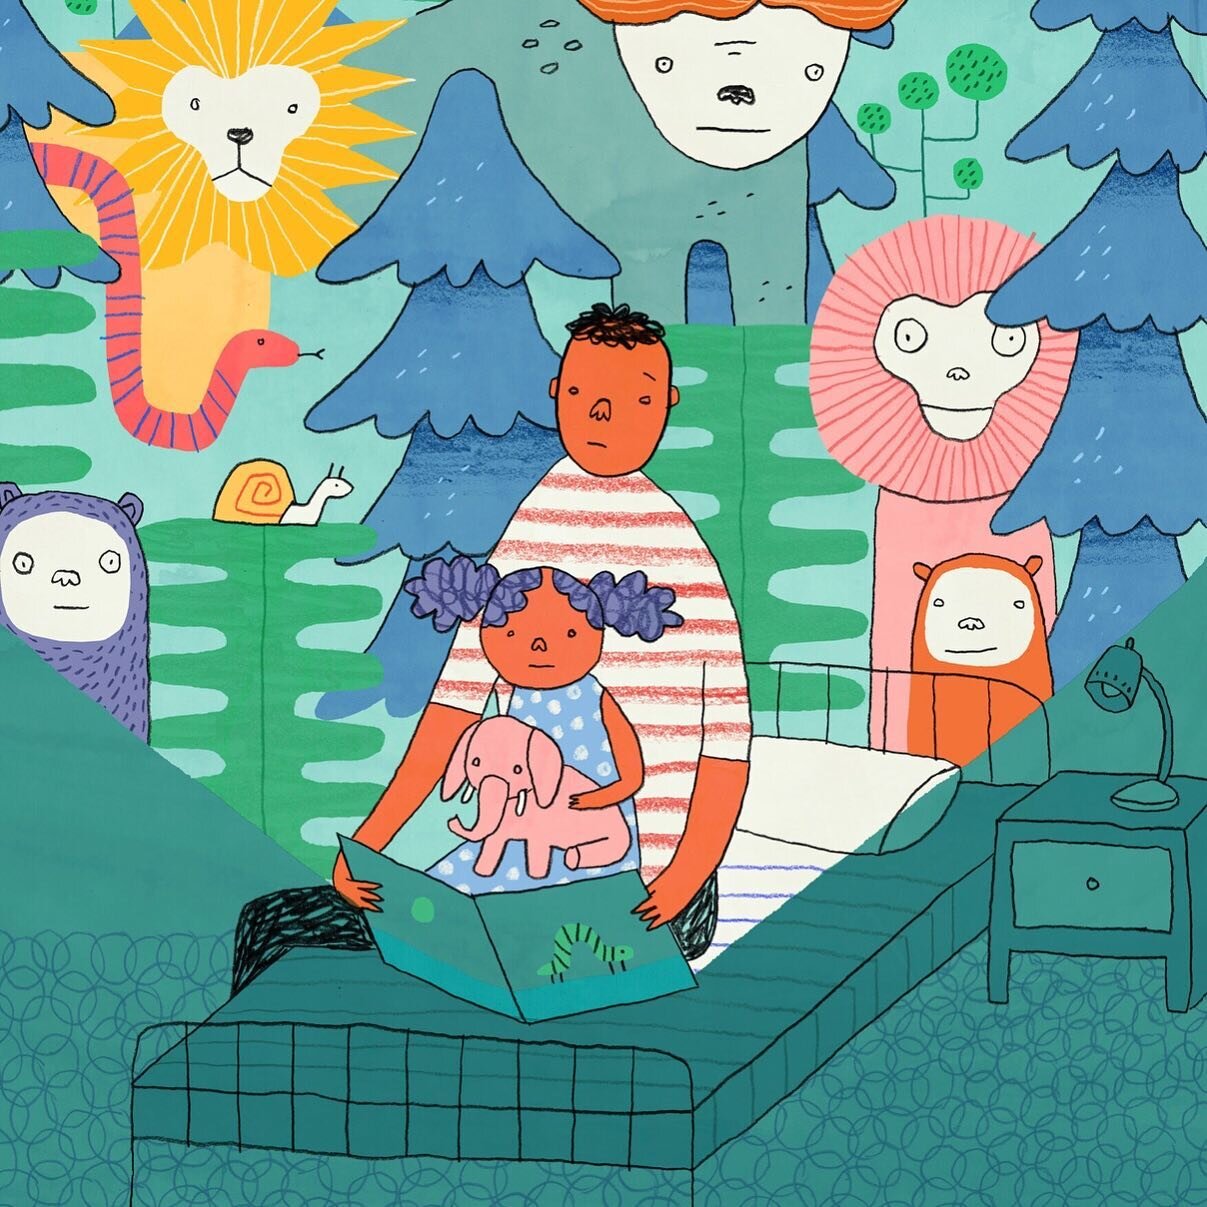 I&rsquo;m thrilled to share that my essay &ldquo;Where are all the wild things, daddy?&rdquo; will be in the New York Times on Father&rsquo;s Day. 
&hellip;
#modernlove #newyorktimes #fathersday #brianrea #wherethewildthingsare #cynthiarylant #brende